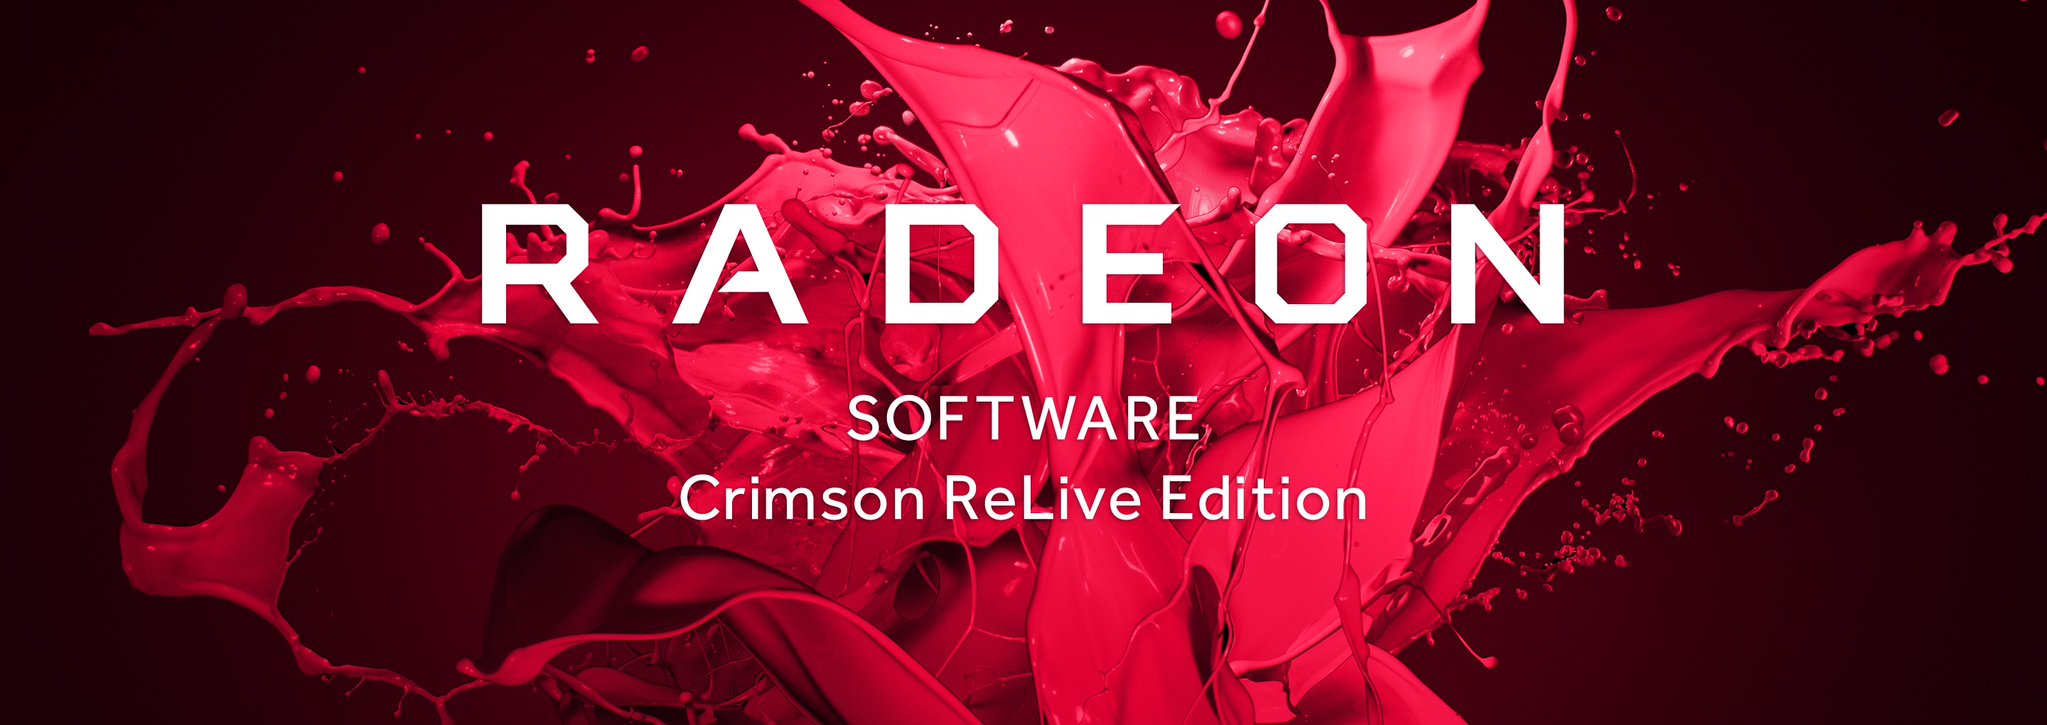 Media asset in full size related to 3dfxzone.it news item entitled as follows: AMD rilascia il driver Radeon Software Crimson ReLive Edition 17.6.1 per DiRT 4 | Image Name: news26493_Radeon-Software-Crimson-ReLive-Edition_1.jpg